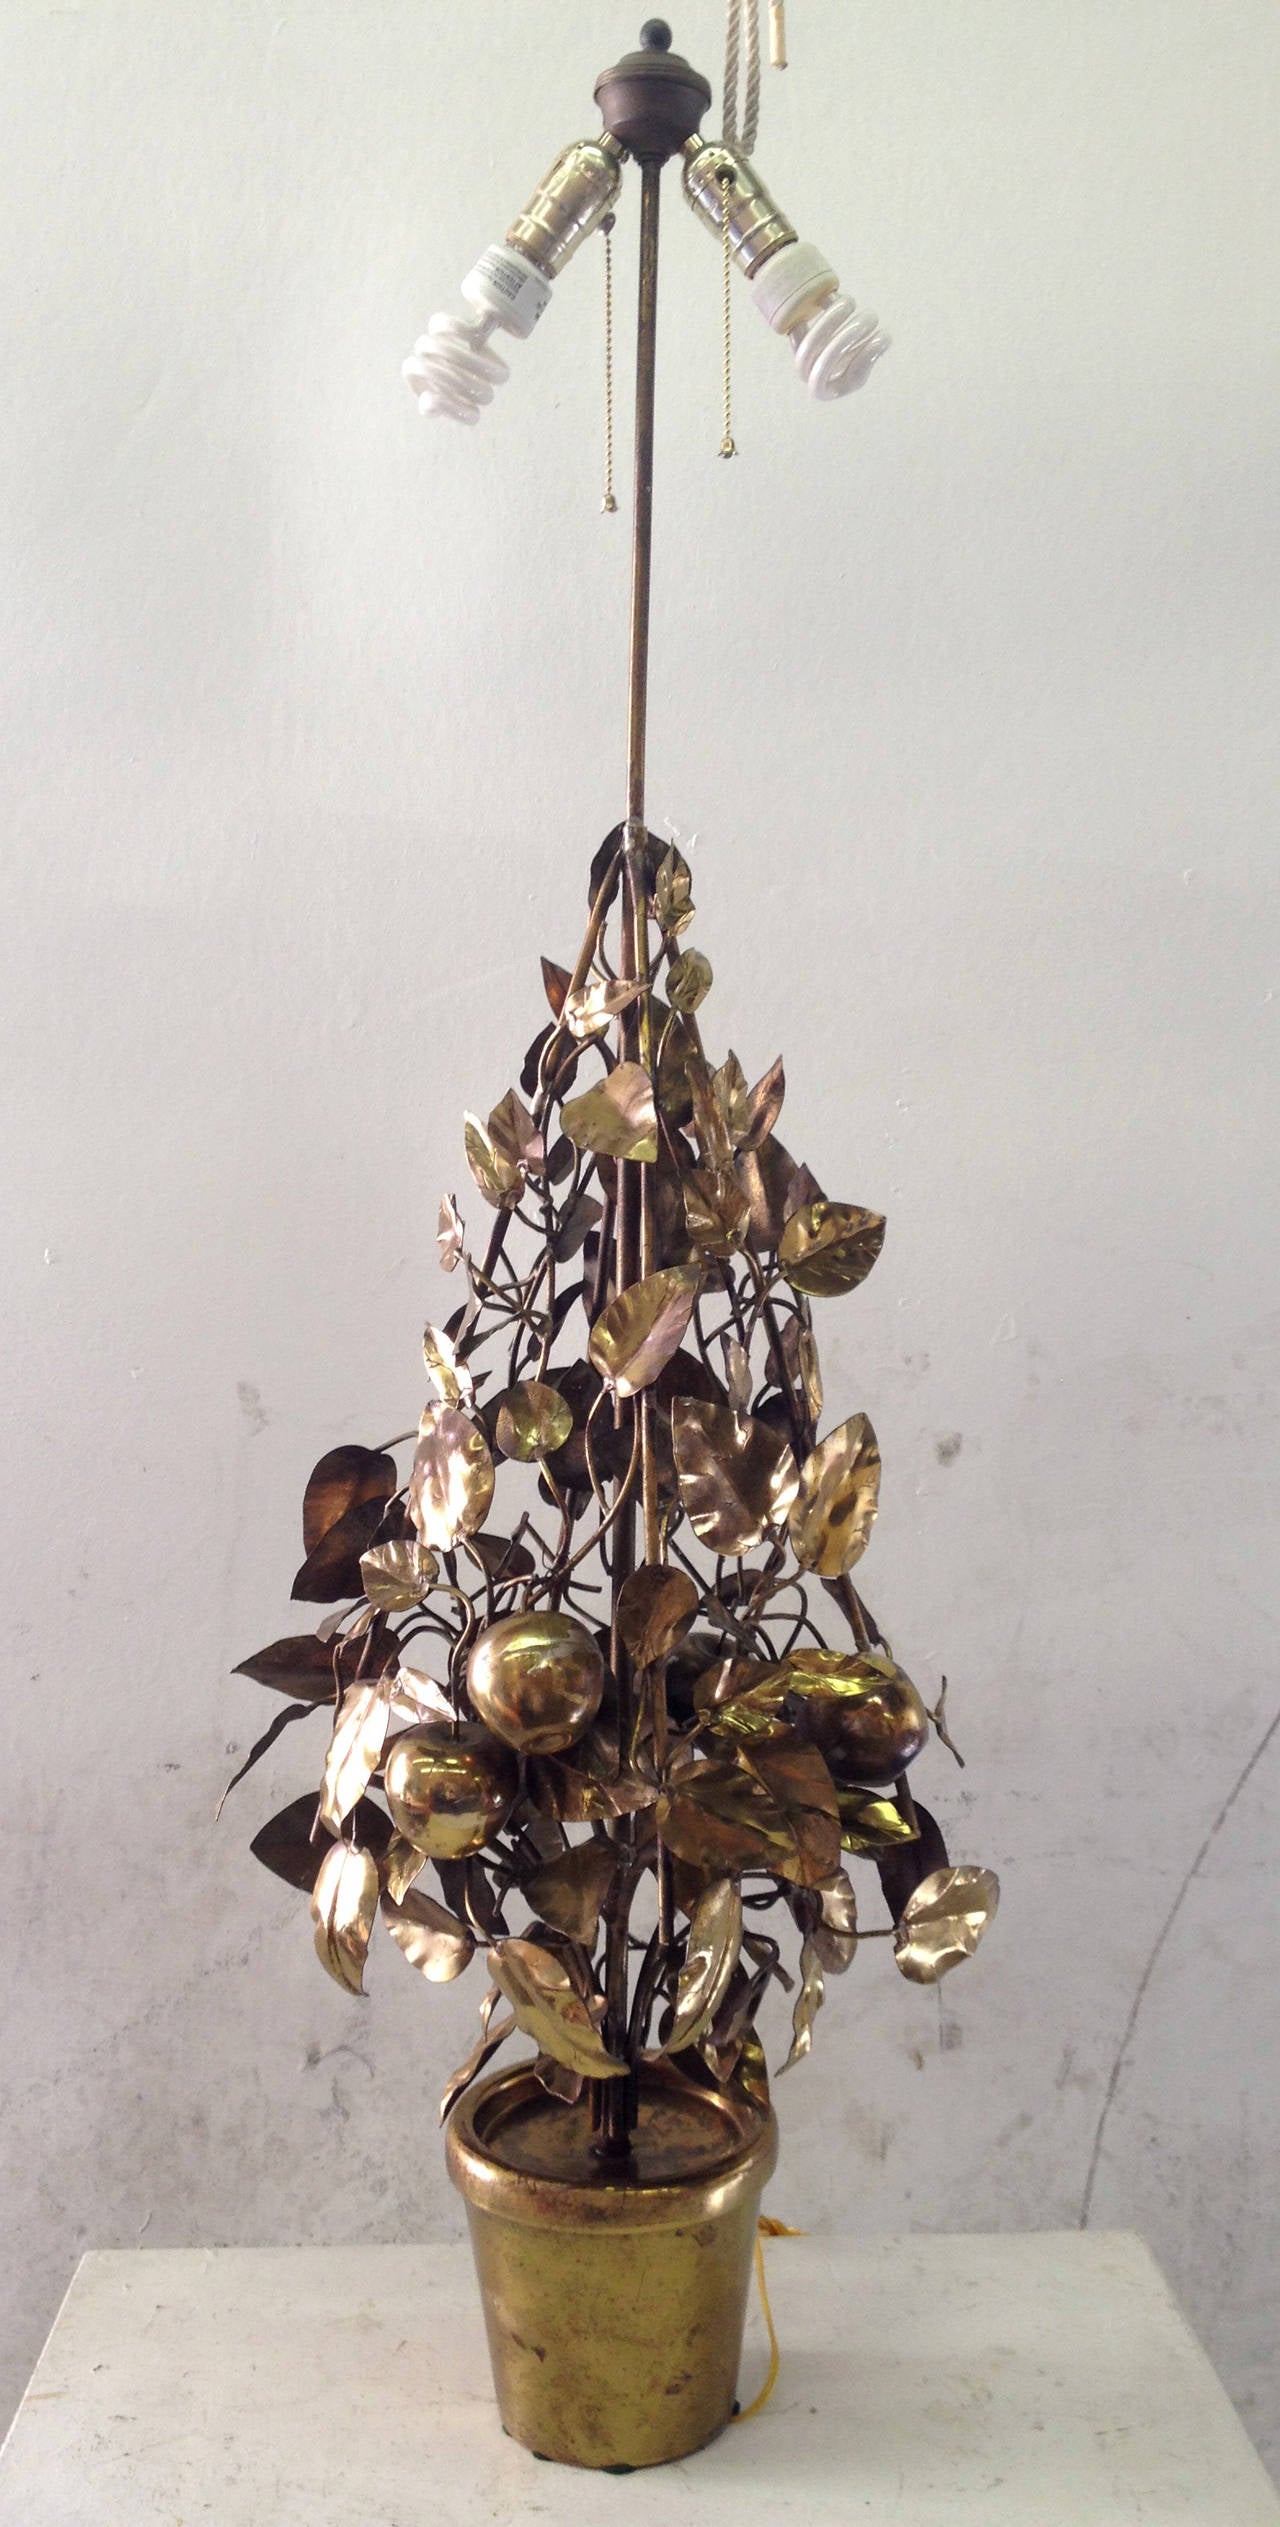 The central form of this large brass lamp is a tapered tree with apples. Each branch, leaf, and apple are constructed in brass and are supported by a brass frame. The lamp has two bulbs which can be illuminated independently of one another.